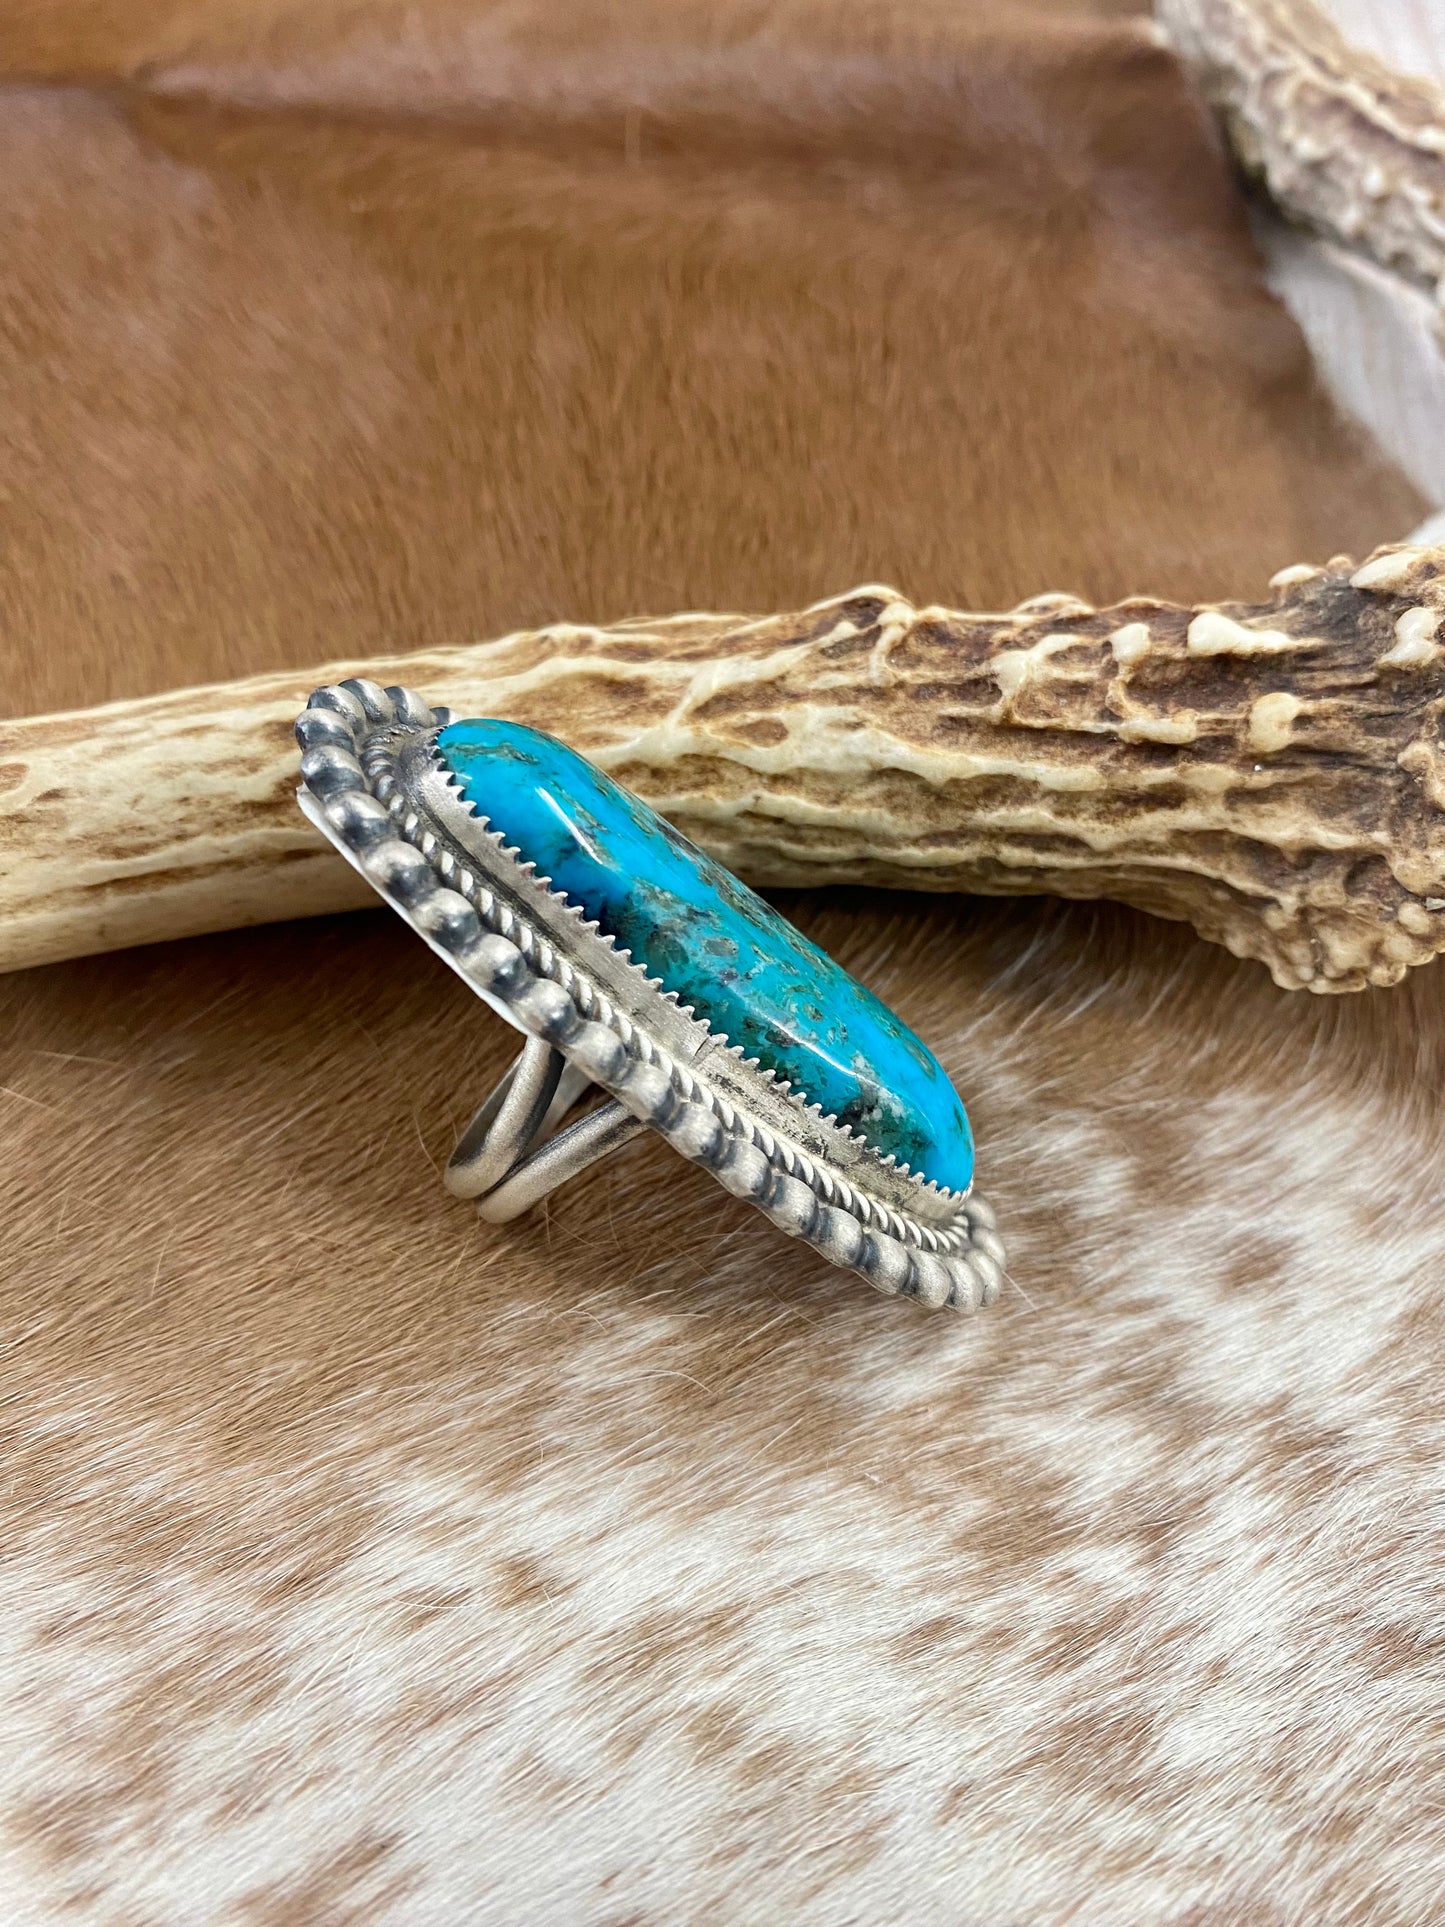 Kingman turquoise single-stone sterling silver large ring. Stamped sterling and signed "Leslie Nez” on the back by Native American artist silversmith Leslie Nez. Available in size 7.5. The perfect piece to add to your accessory wardrobe and jewelry collection.   Size: 2.5 Inches Length X 1 1/4” Inch Width    Stone: Kingman Turquoise   Signed: YES “Leslie Nez”   Hallmark: Leslie Nez